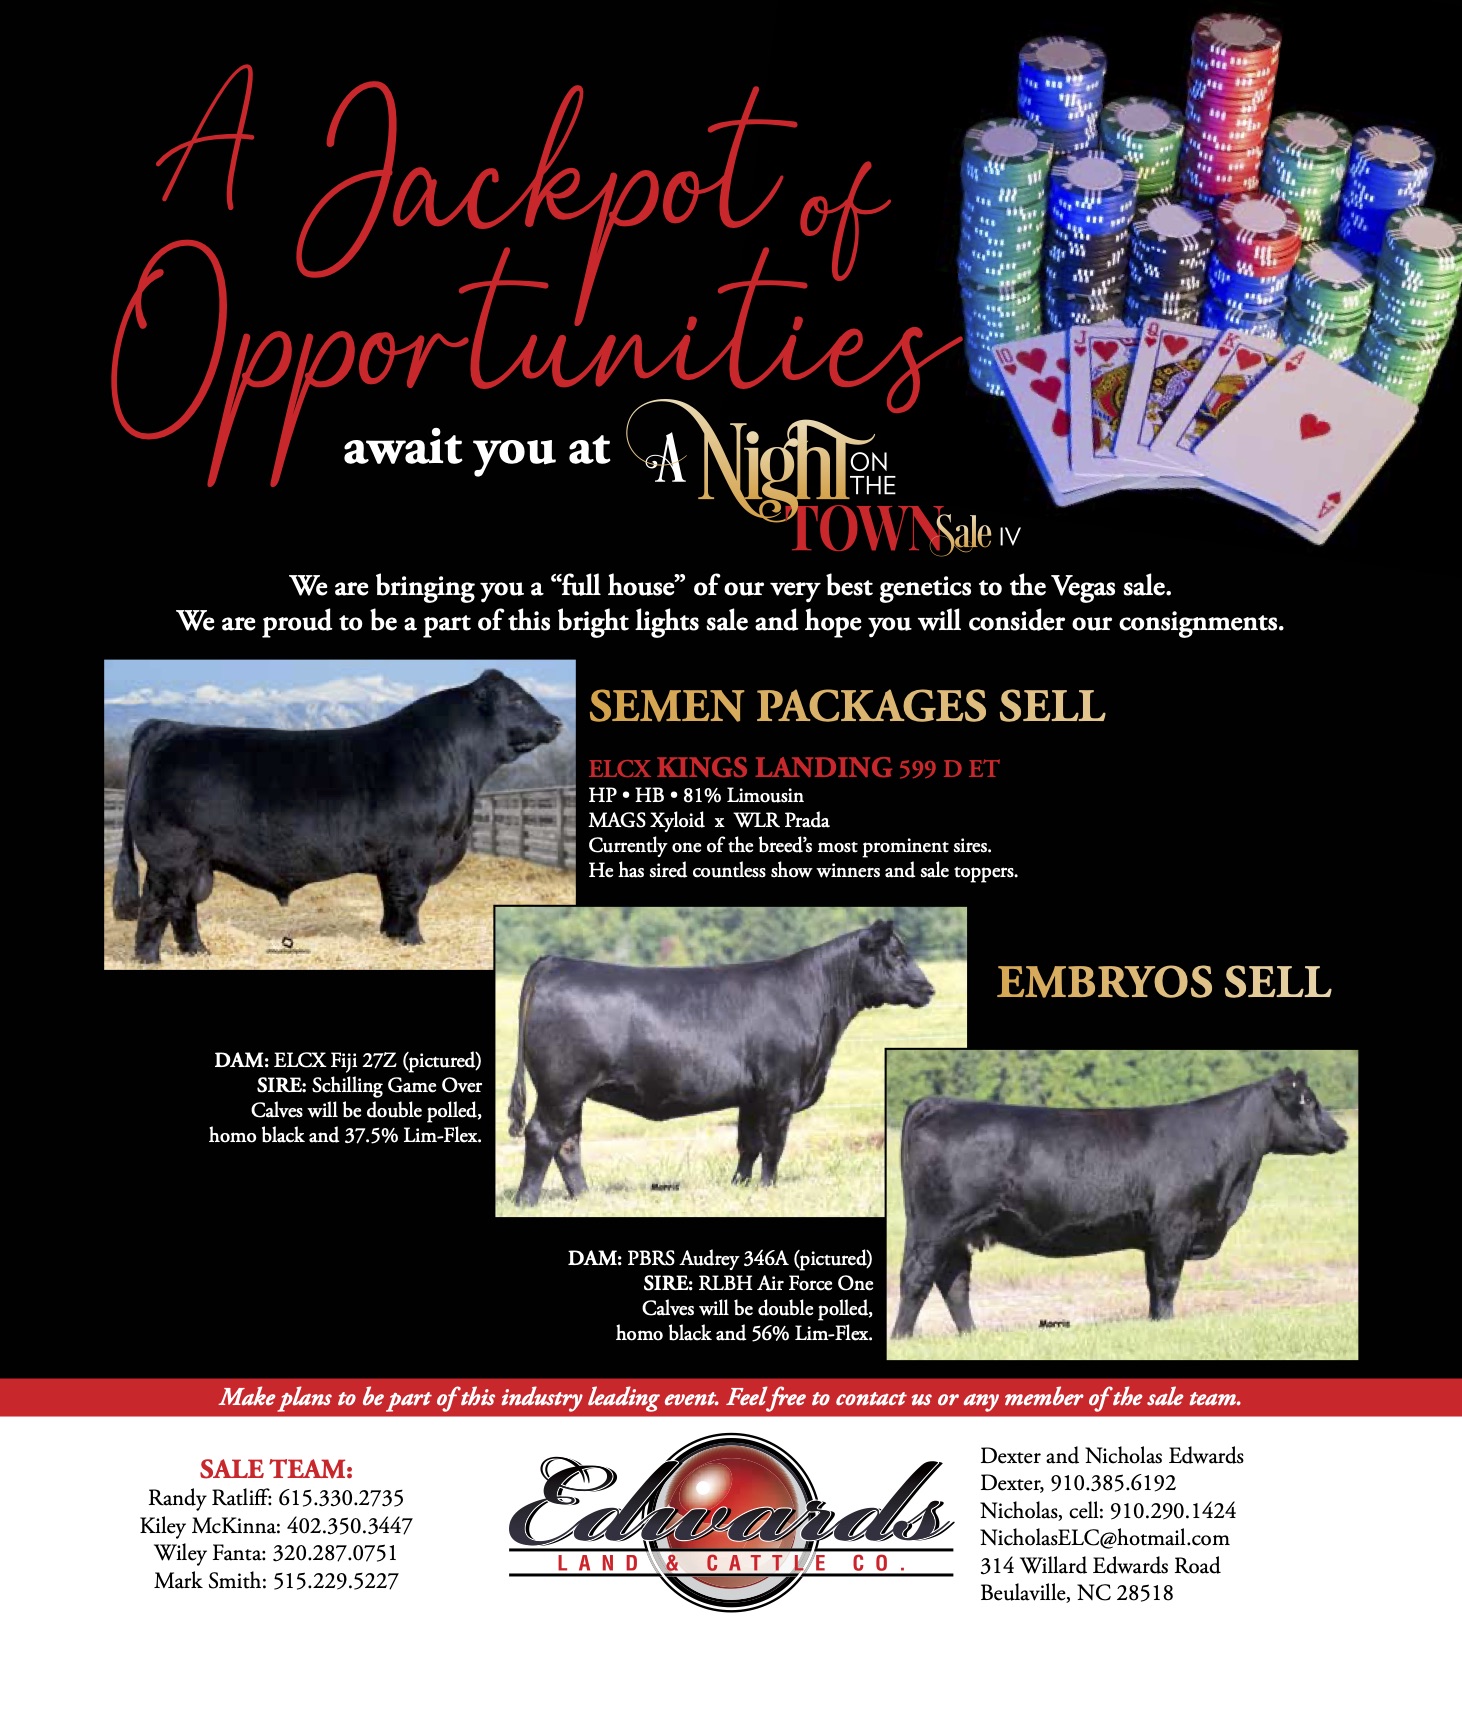 Edwards Land & Cattle  – A Night on the Town Sale IV, 12.11.2021